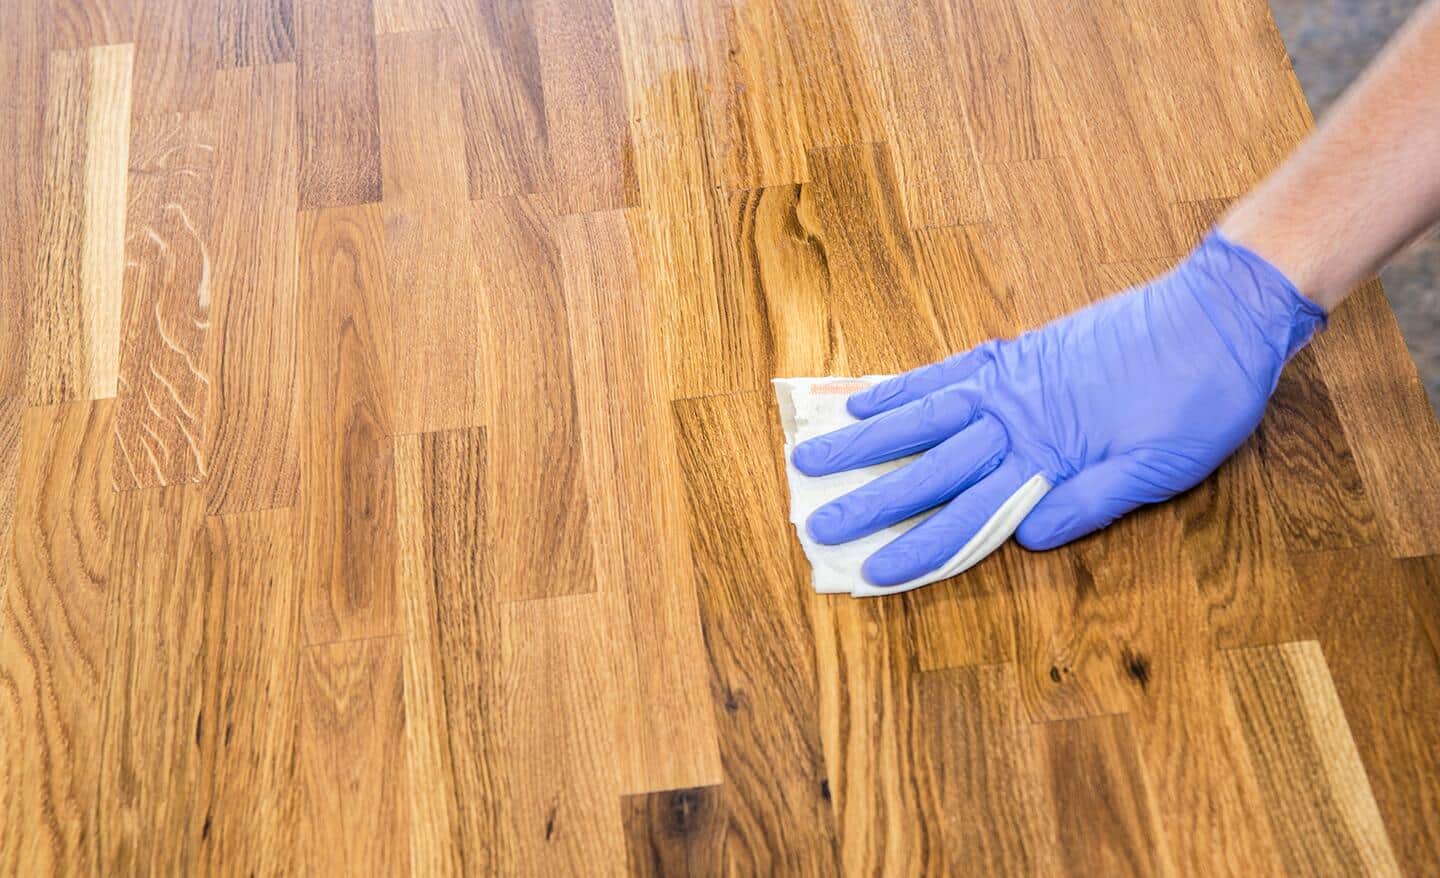 A person uses a cloth to clean a butcher block countertop surface.